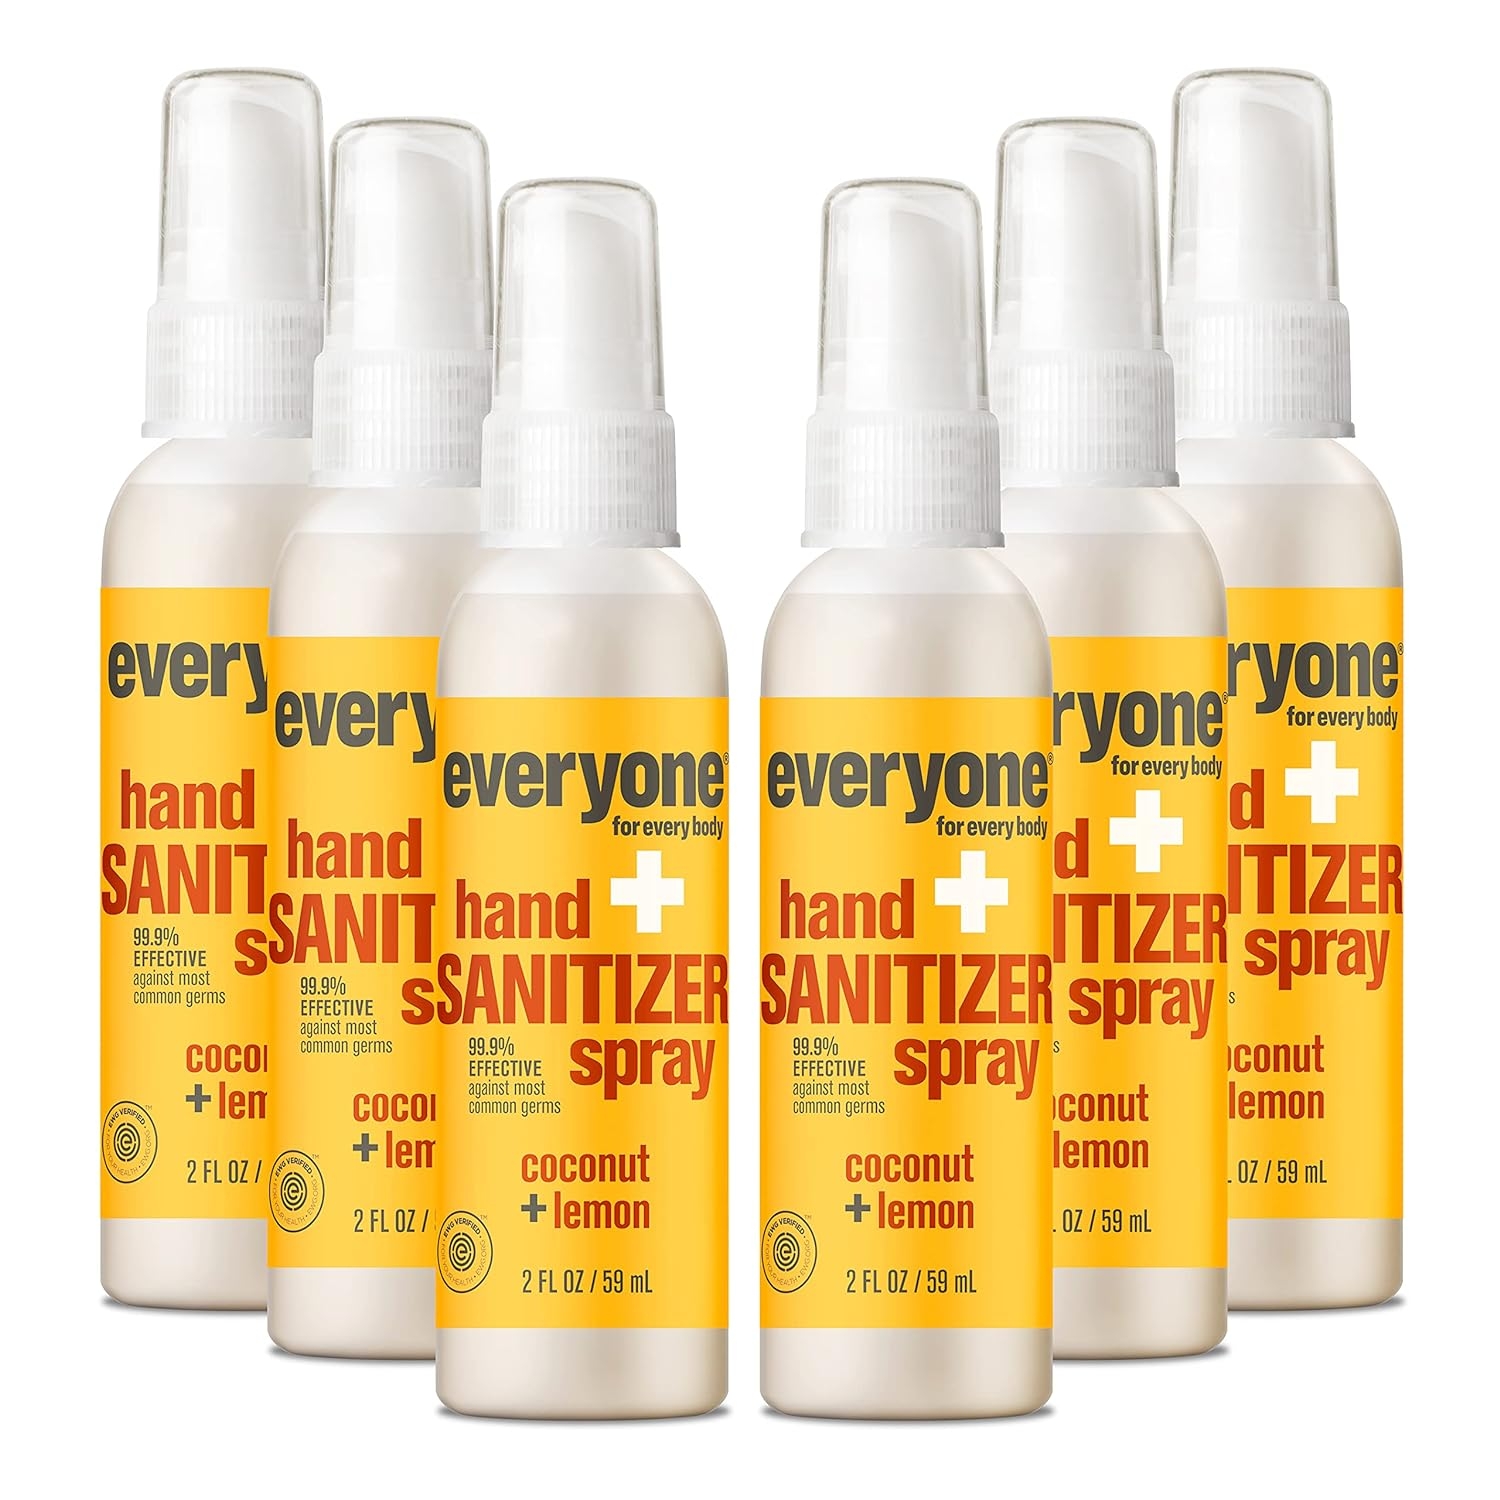 Everyone Hand Sanitizer Spray, 2 Ounce (Pack of 6), Travel Size, Coconut and Lemon, Plant Derived Alcohol with Pure Essential Oils, 99% Effective Against Germs (Packaging May Vary)